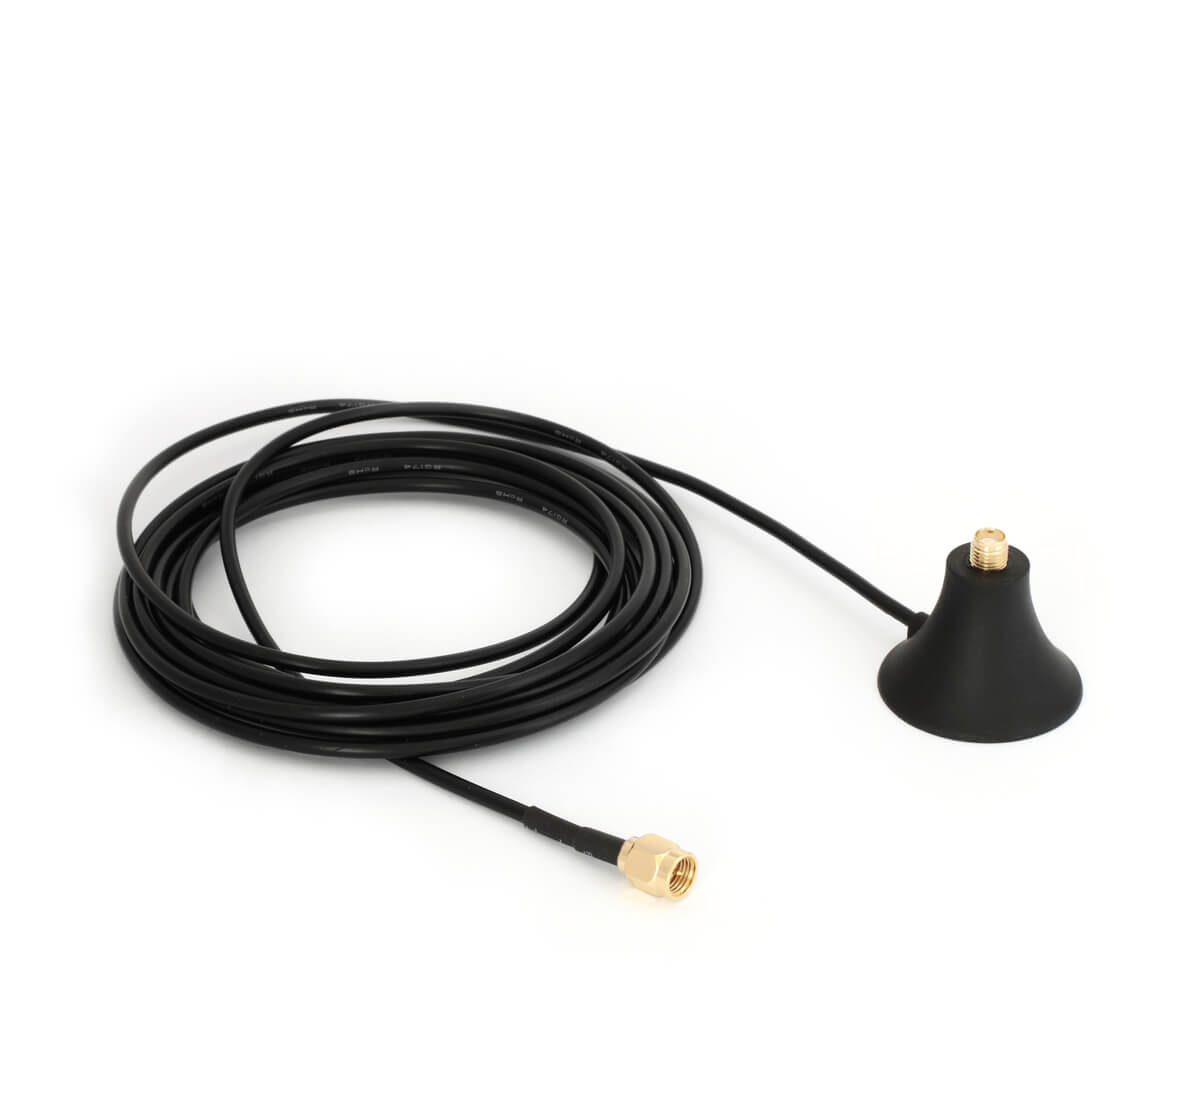 WiFi extension cable with magnetic stand base